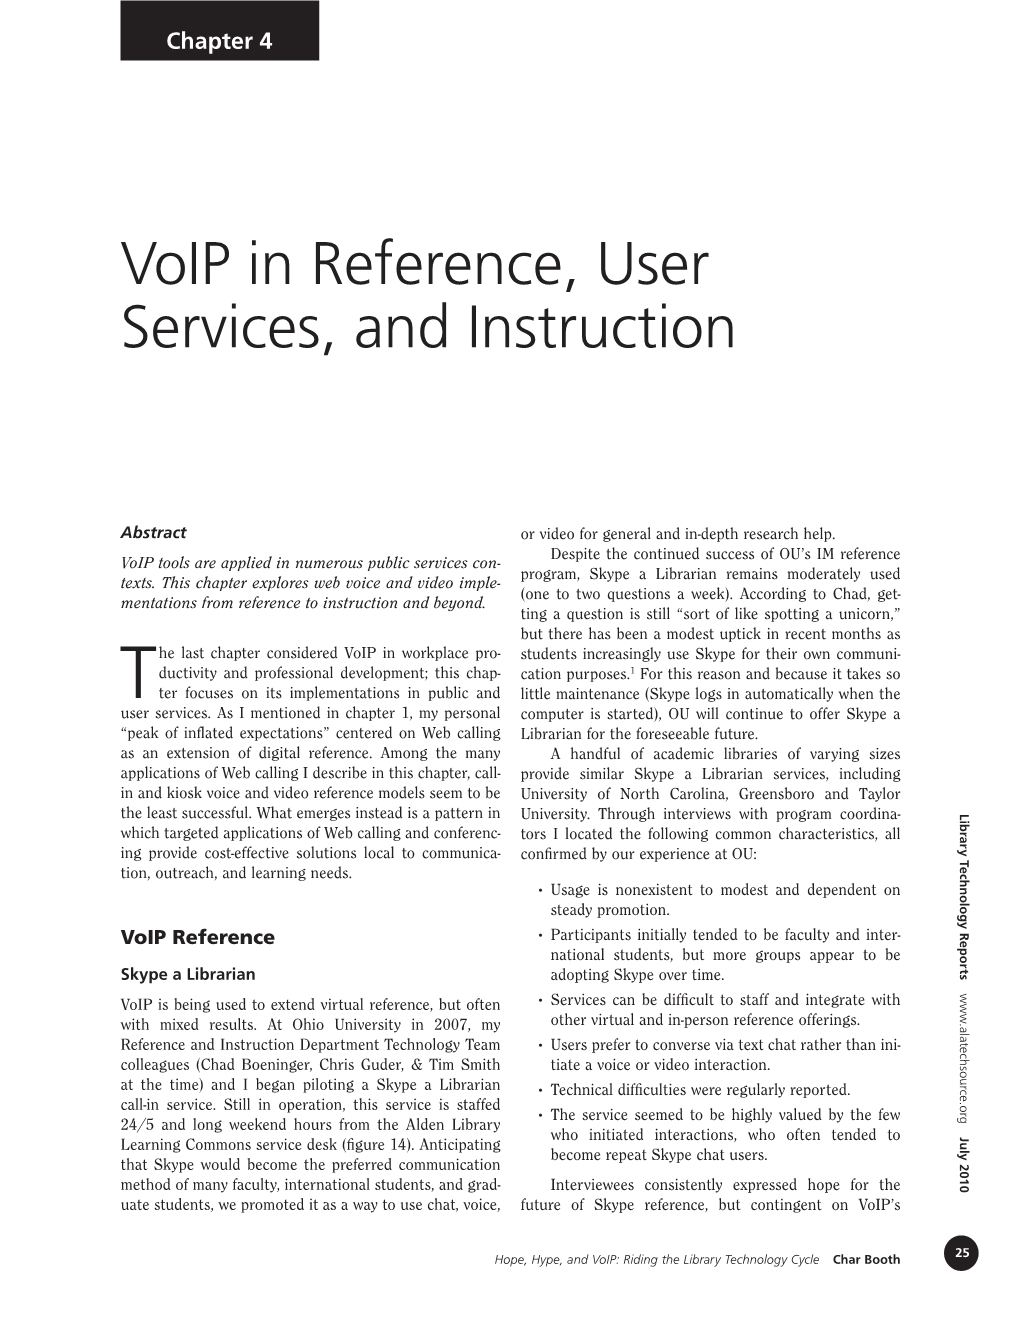 Voip in Reference, User Services, and Instruction